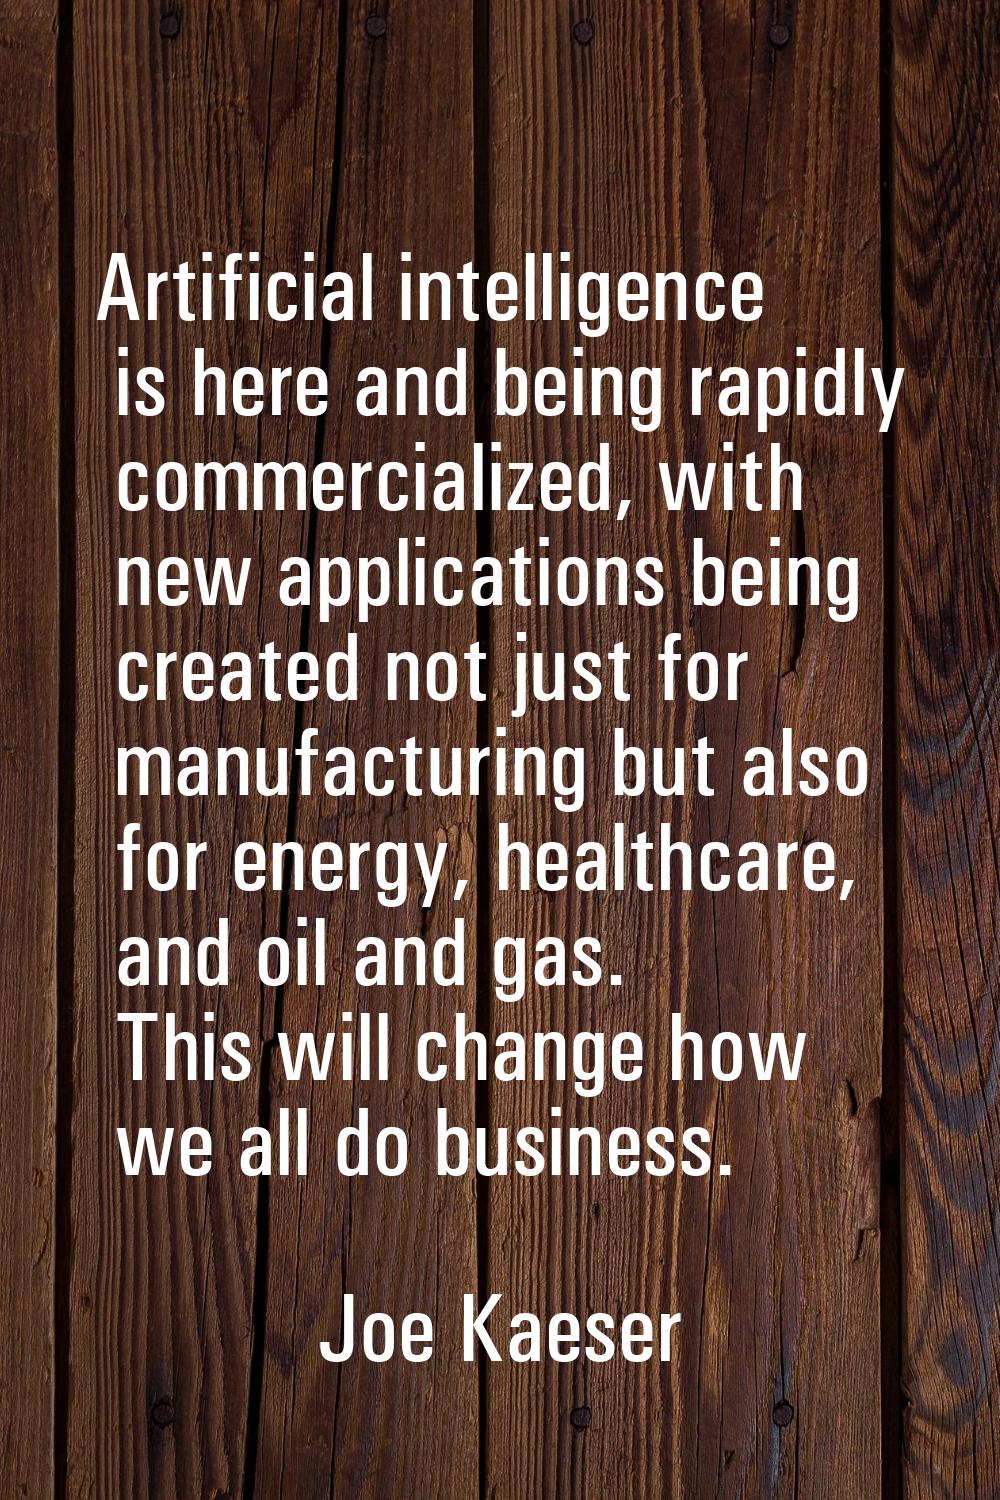 Artificial intelligence is here and being rapidly commercialized, with new applications being creat